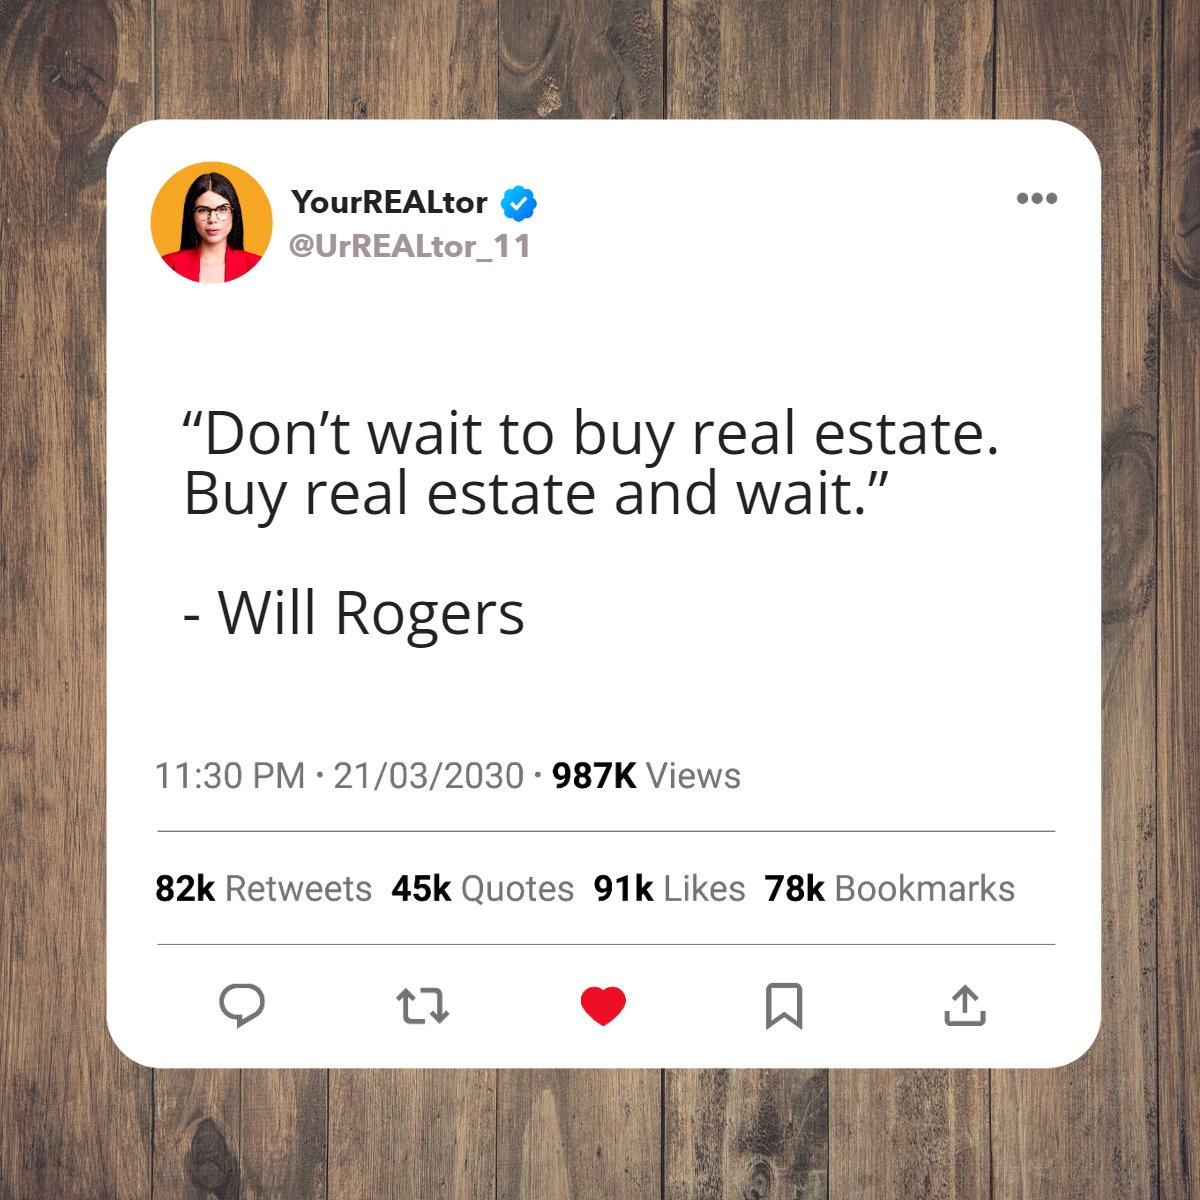 “Don’t wait to buy real estate. Buy real estate and wait.” 
— Will Rogers

#quoteoftheday #realestate #quotes
 #Realestate #Brokerlife #Marketupdate #thevisiongroup #thevisiongroupres #realtor #Orangecounty #losangelescounty #Riversidecounty